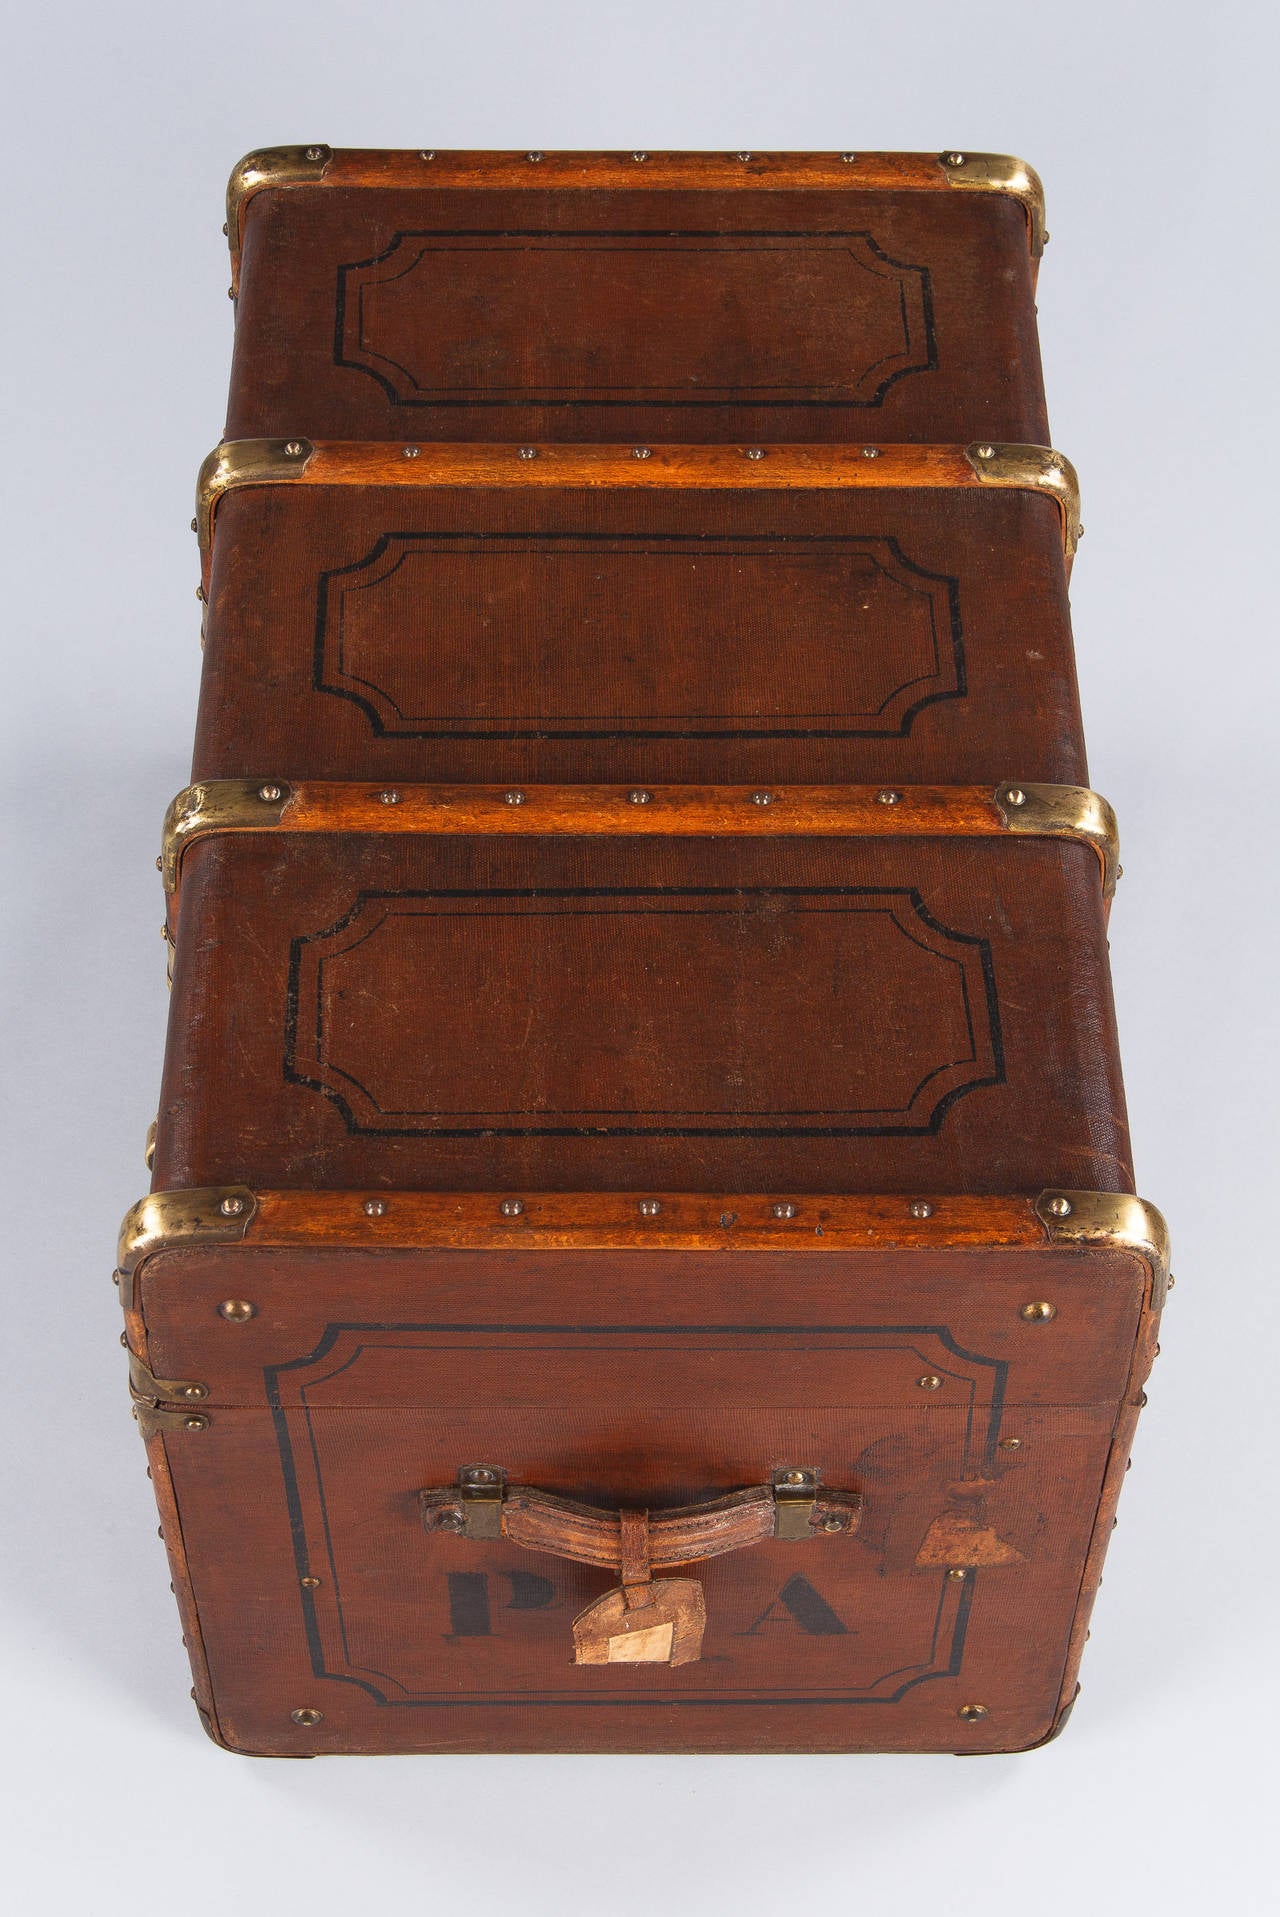 20th Century French Traveling Trunk from Provence, Early 1900s